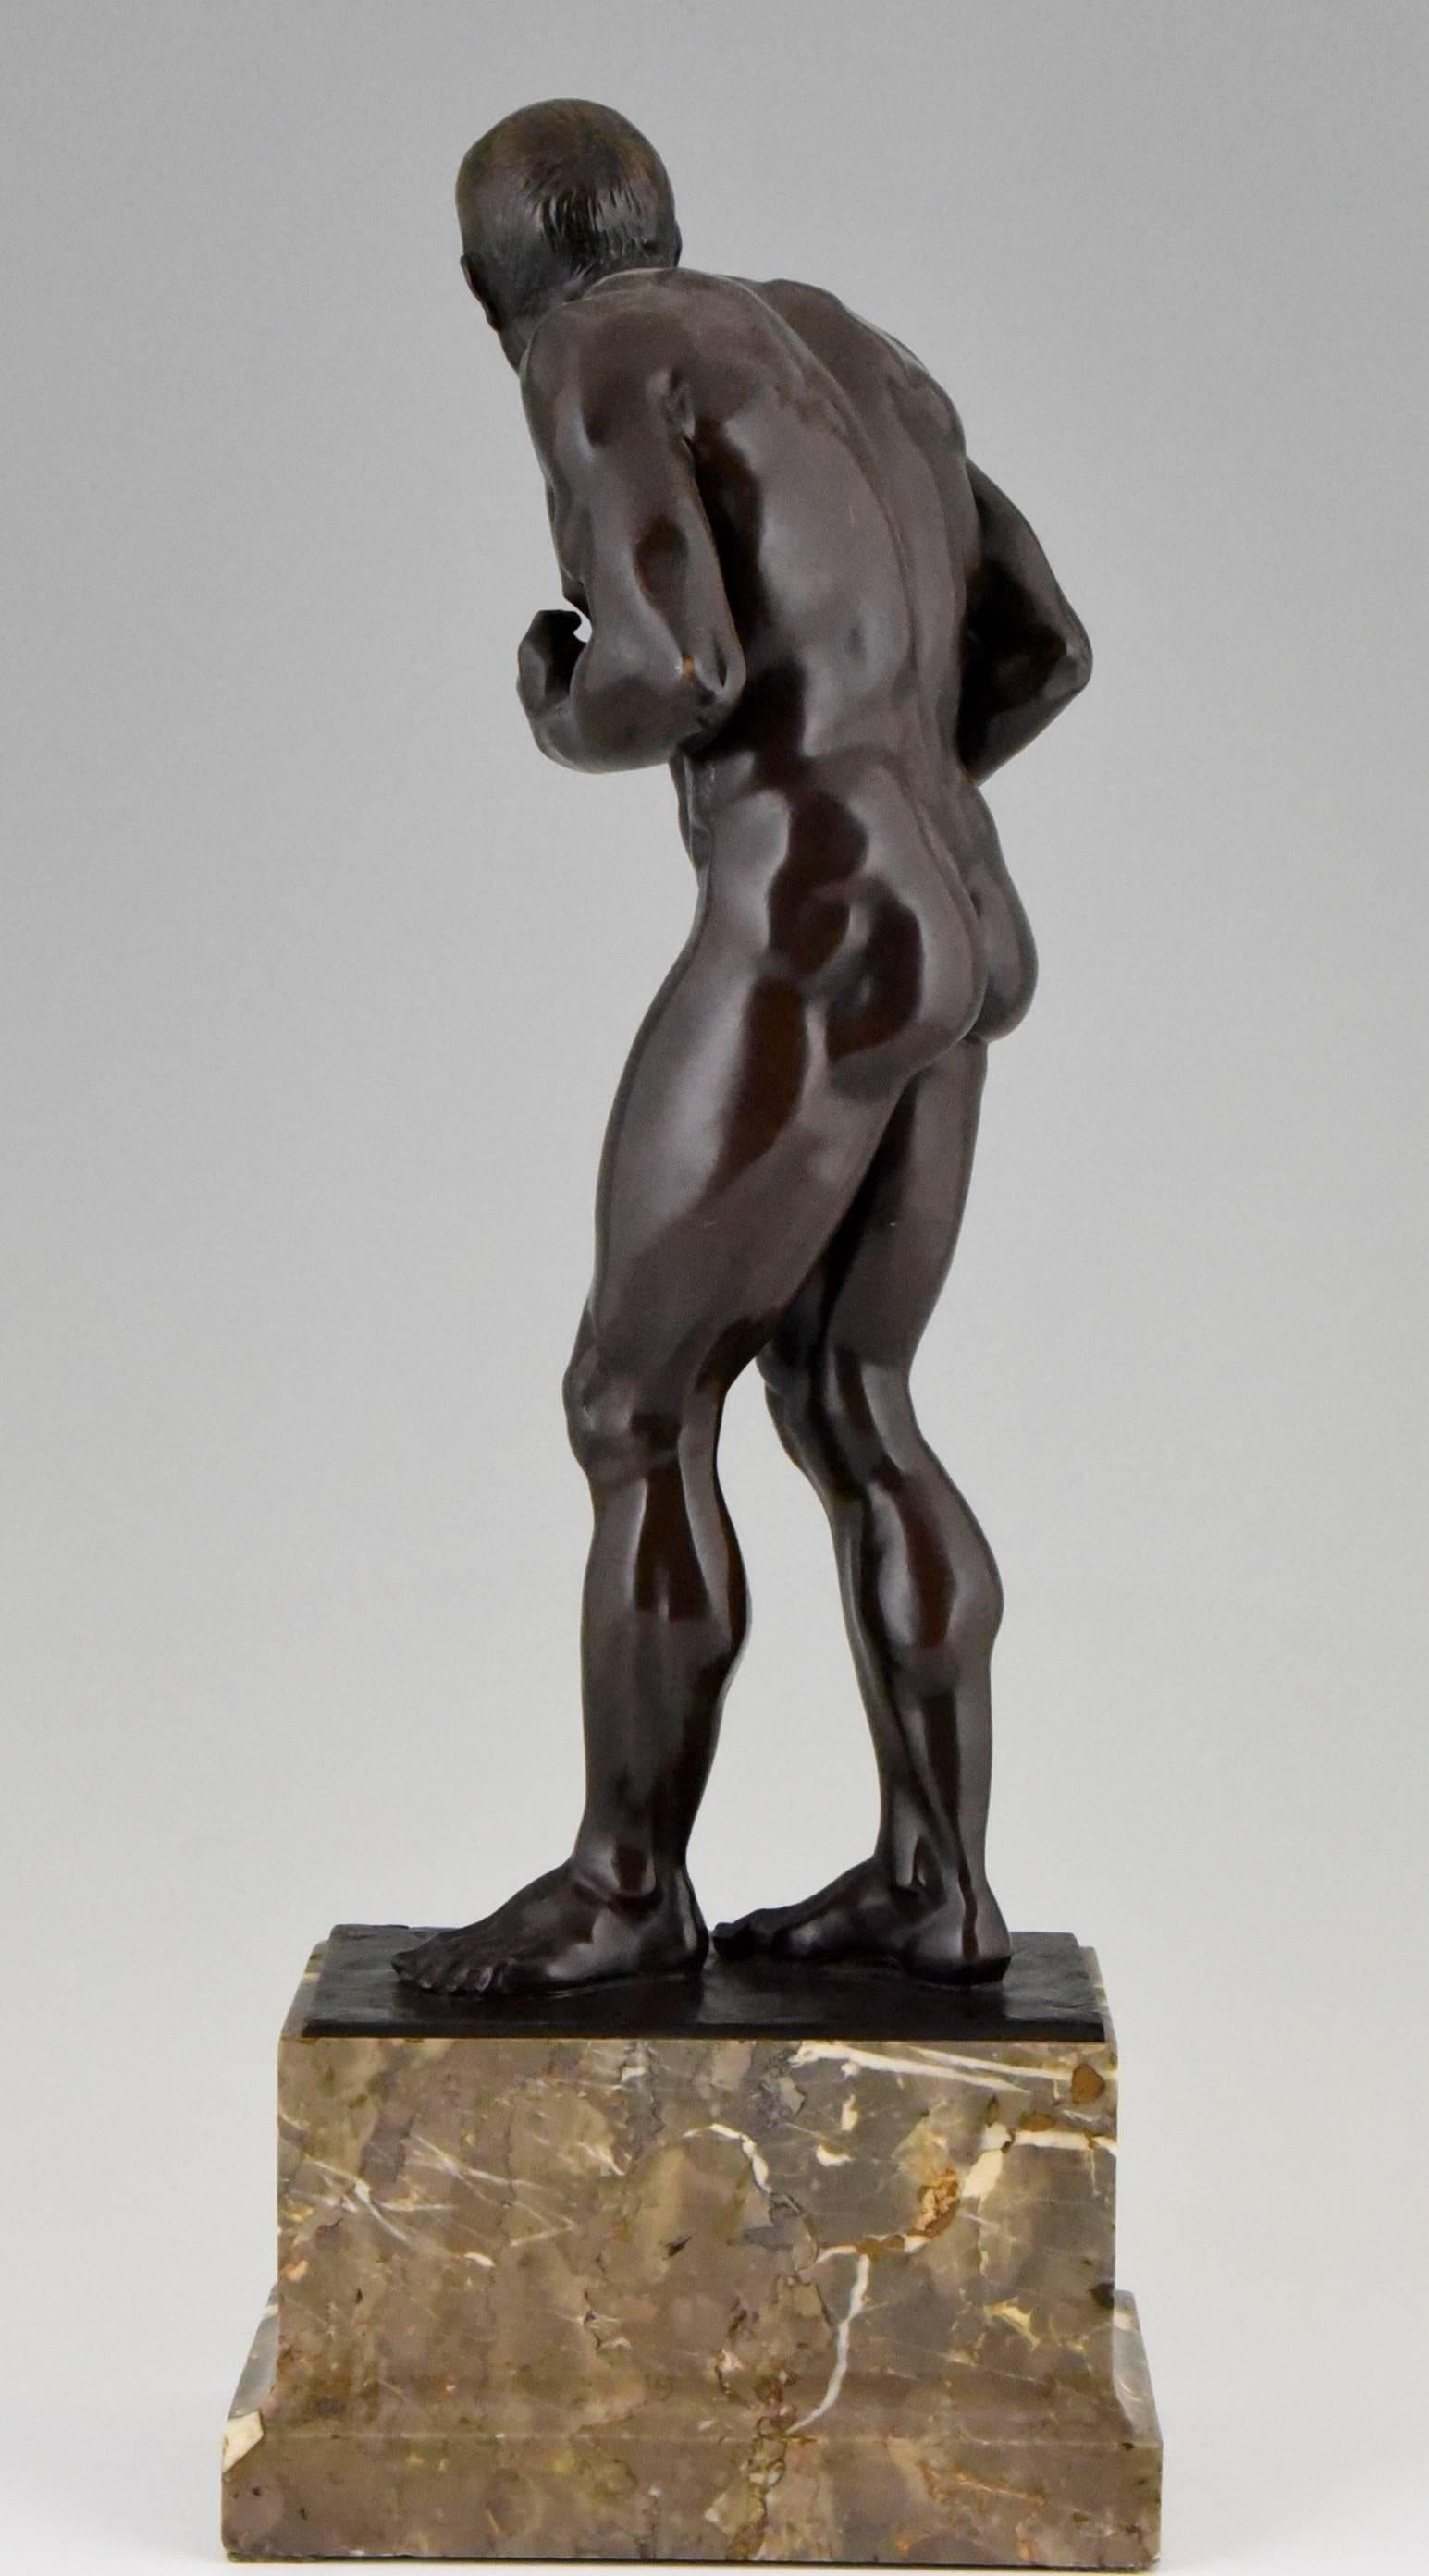 Romantic Antique Bronze Male Nude Boxer by Otto Feist, Germany 1906 Foundry Mark